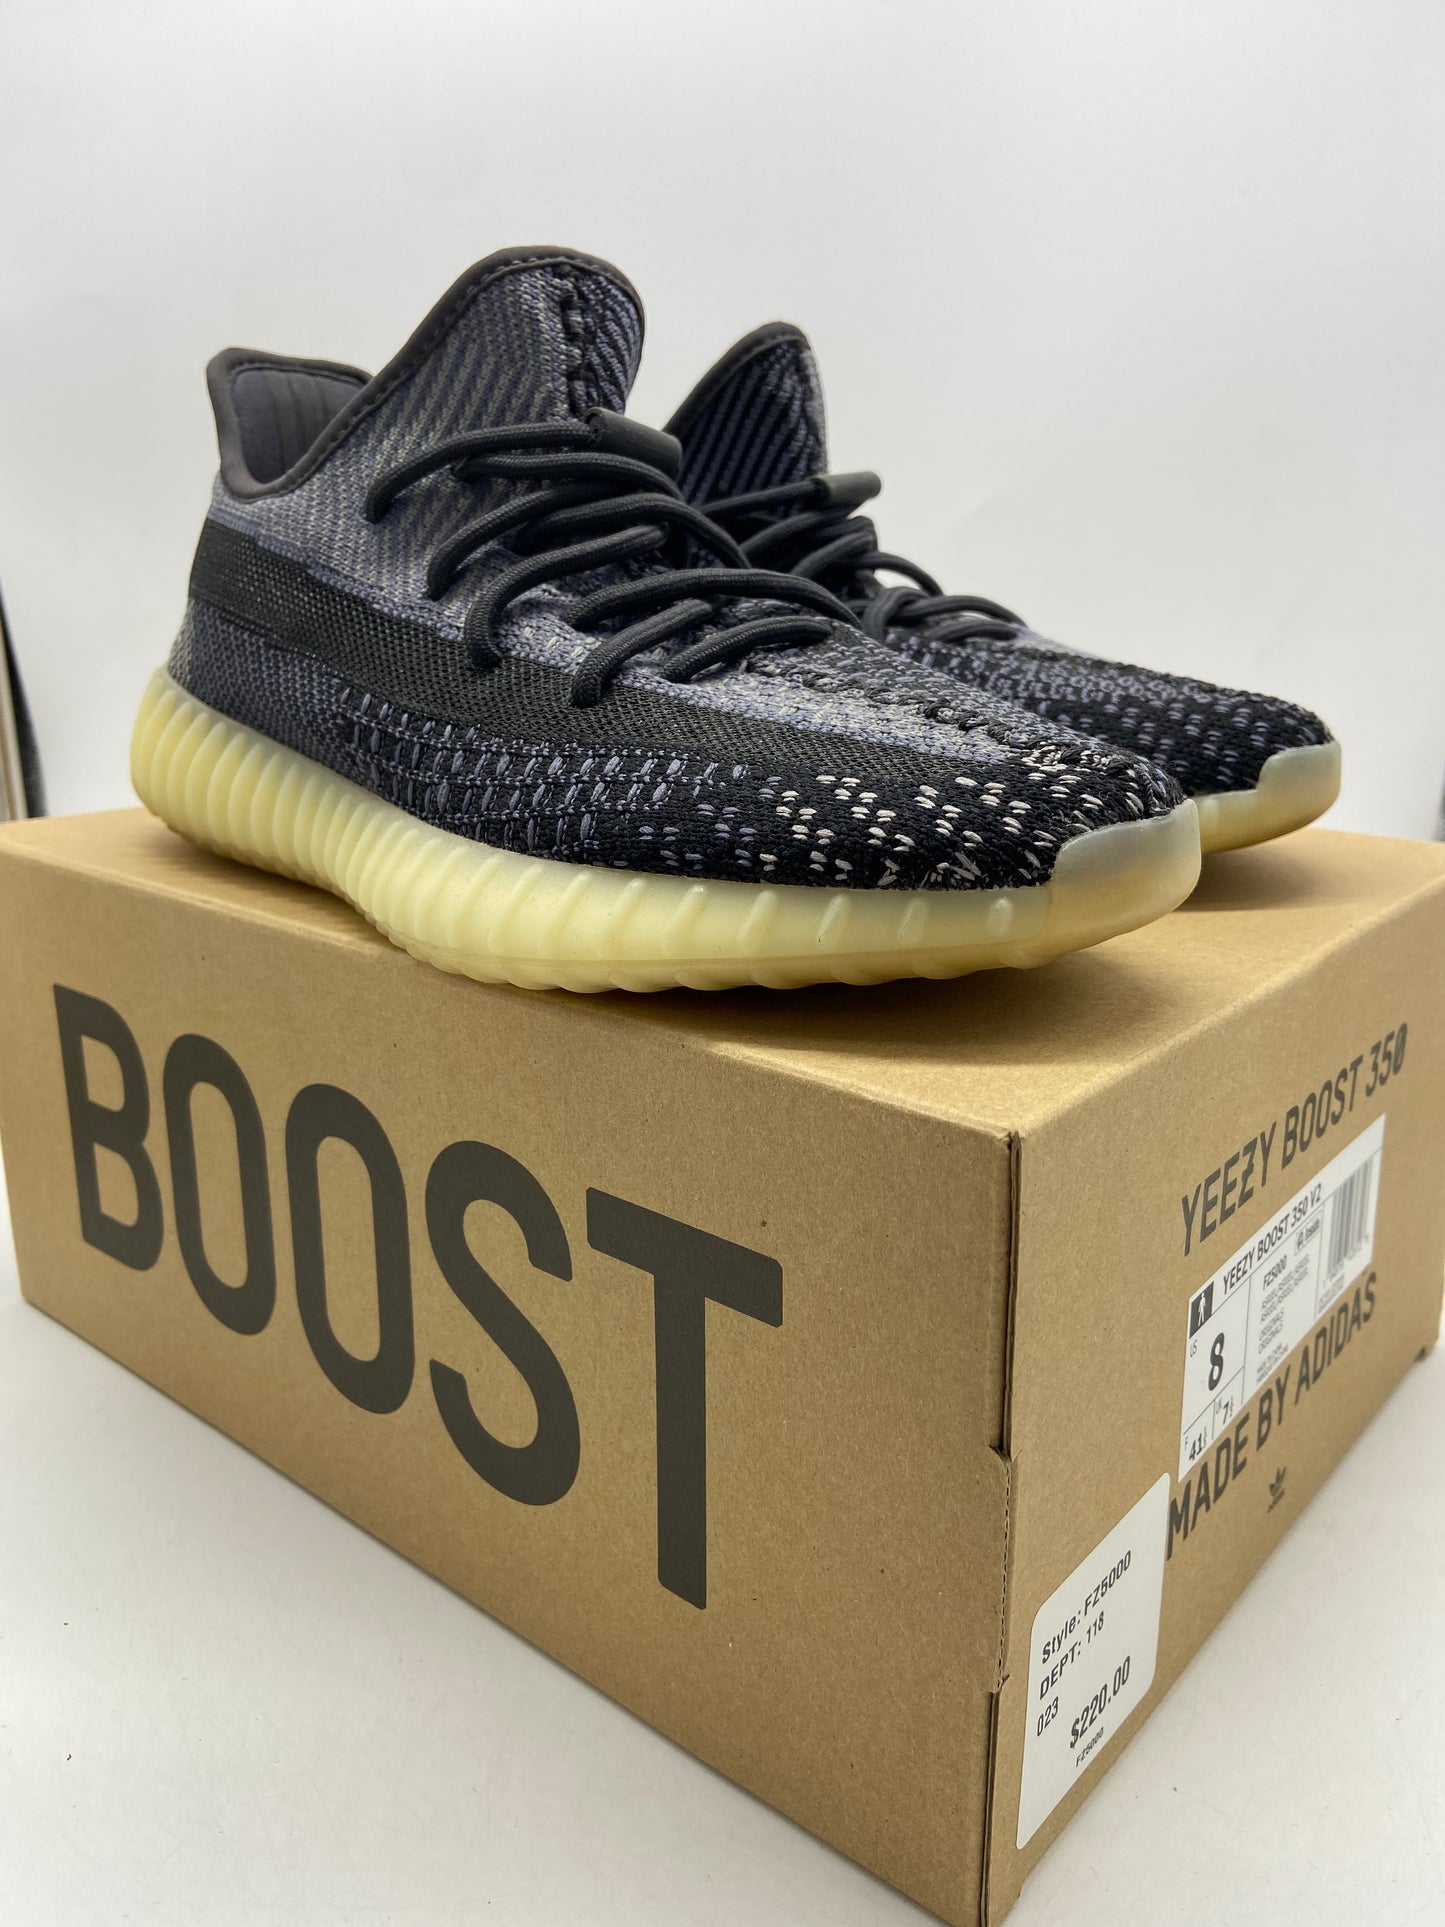 Preowned Yeezy Boost 350 V2 'Carbon' Sz 8M/9.5W GY7658